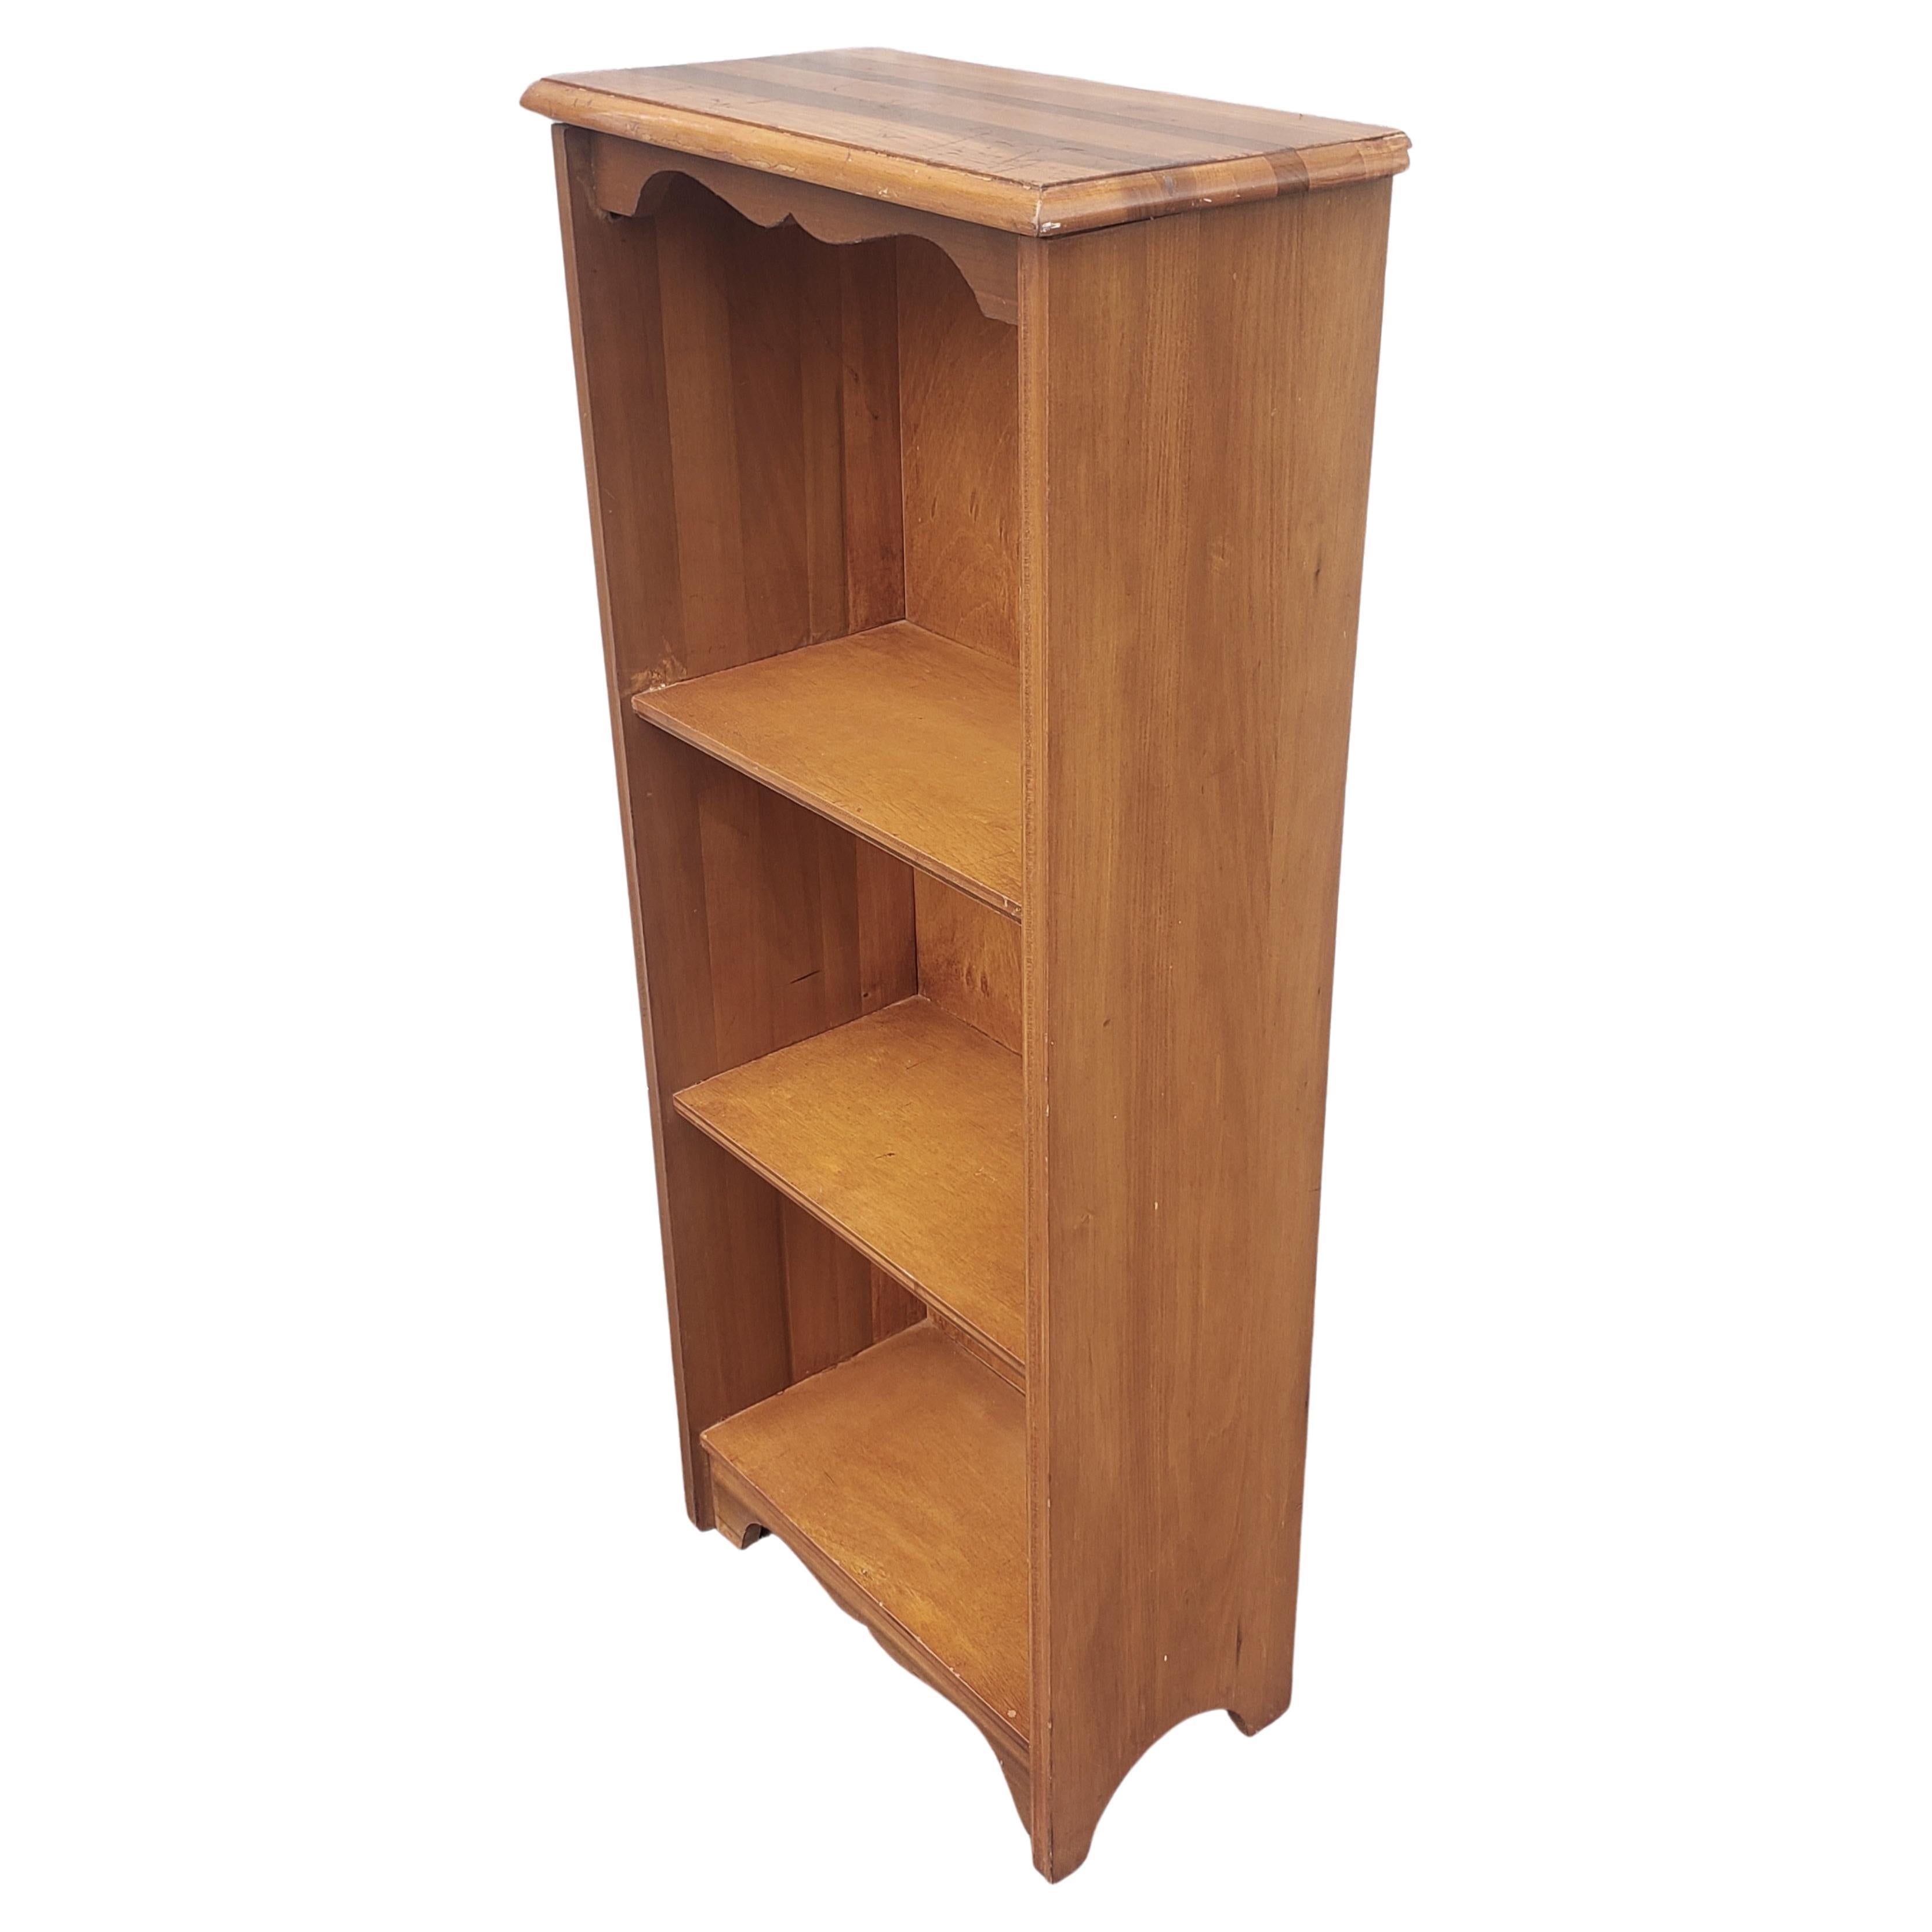 A midcentury American Classical Three Tier Light Cherry Narrow Bookcase in great structural condition. 
Measures 18